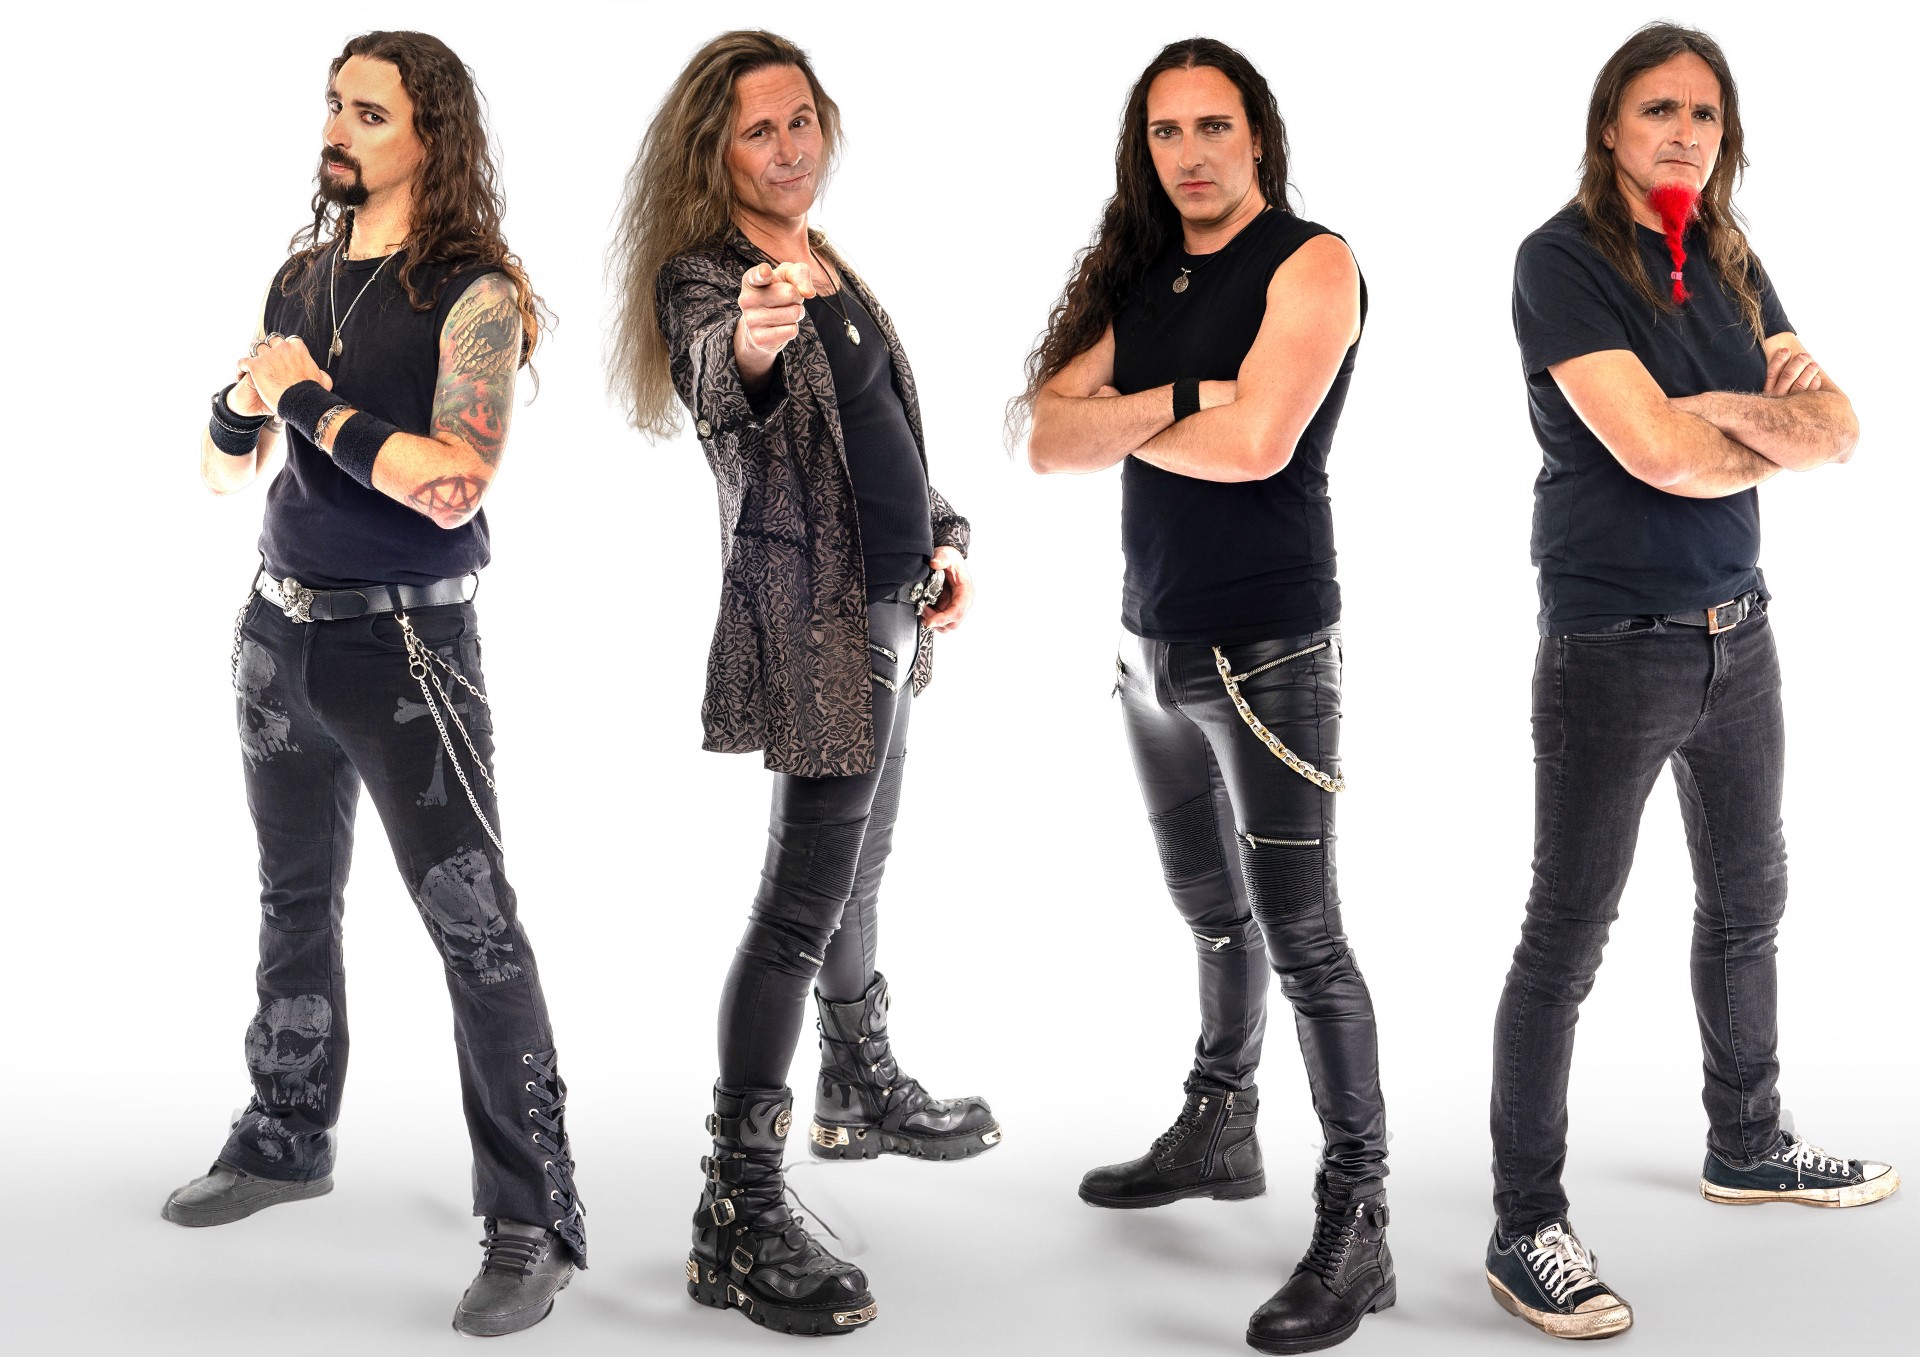 FREEDOM CALL ANNOUNCE NEW ALBUM AND VIDEO!